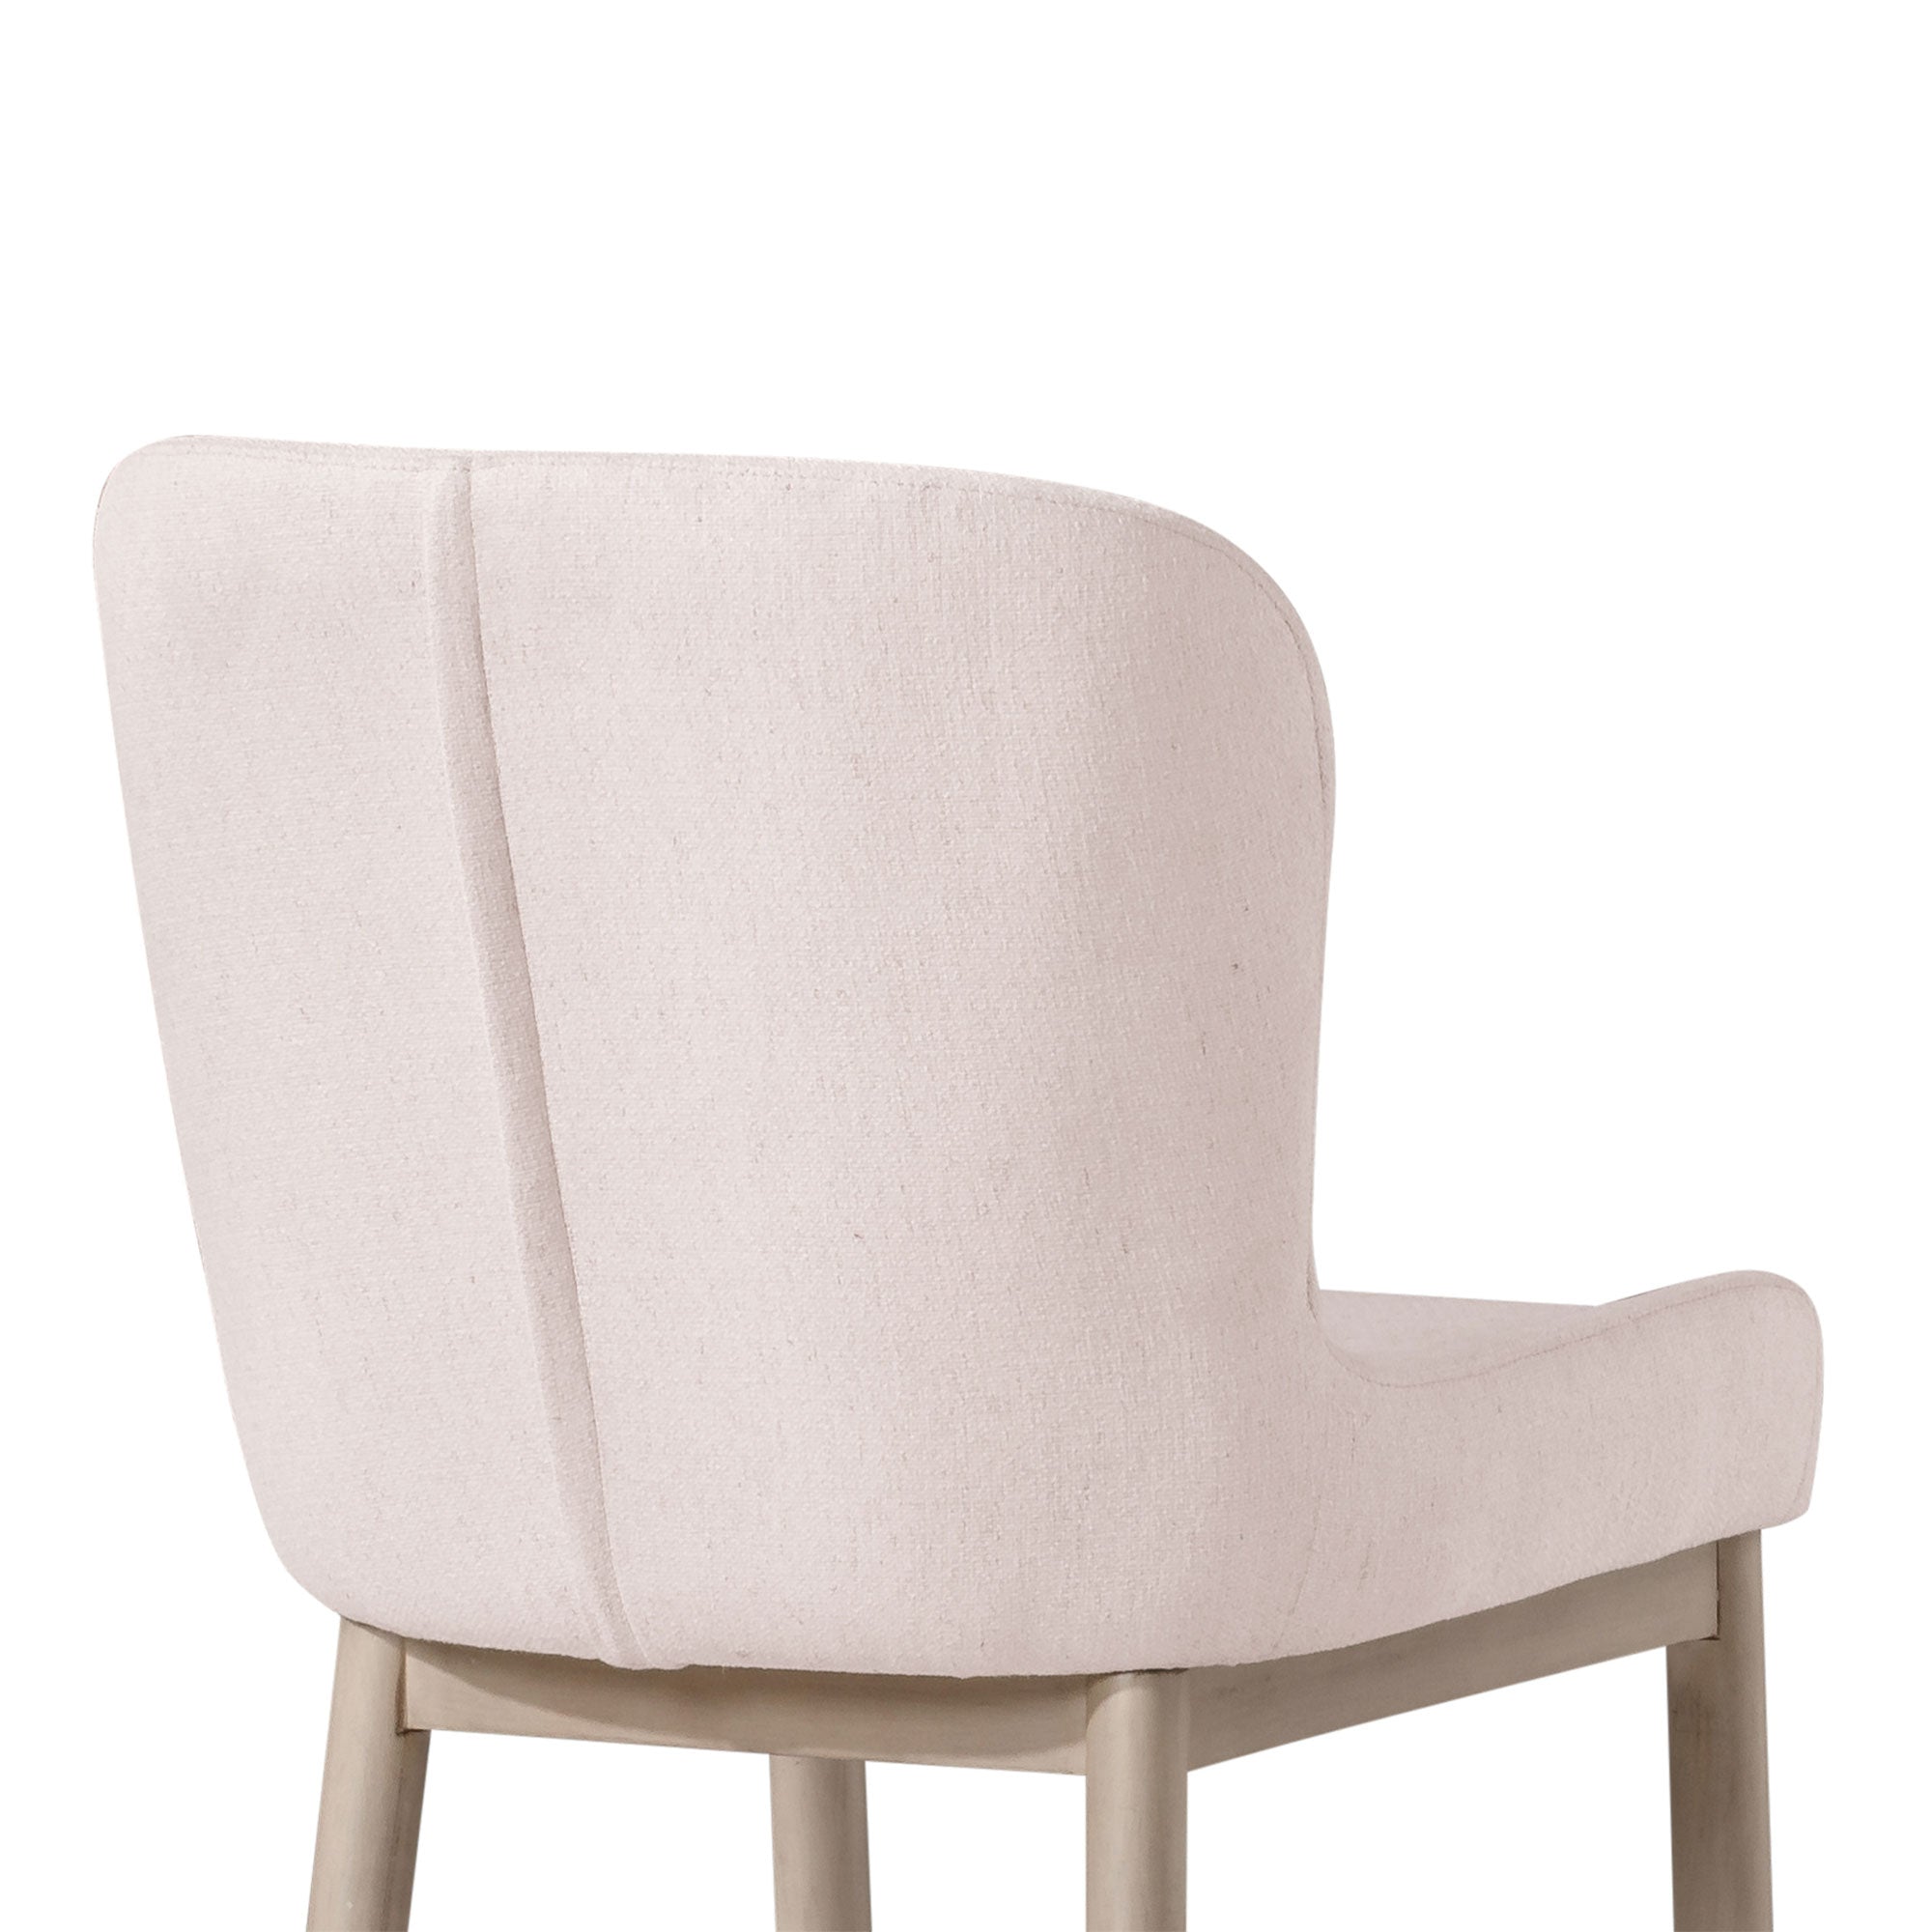 Gia Contemporary Wooden Dining Chair in Refined White Finish with Cream Weave Fabric Upholstery, Set of 2 in Dining Furniture by Maven Lane